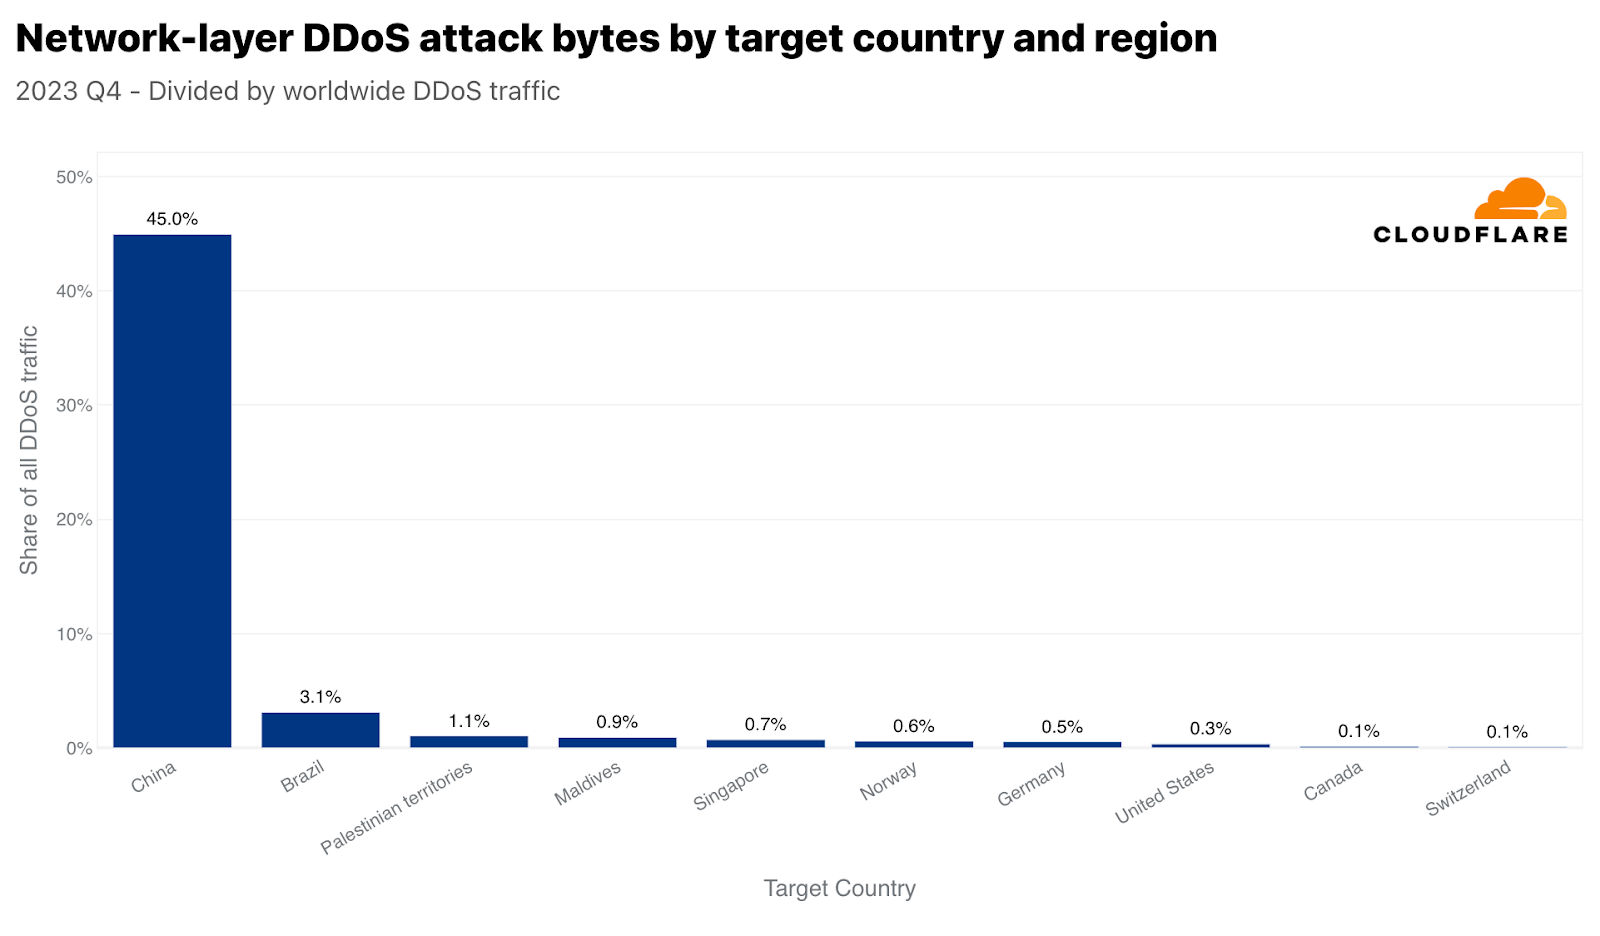 Top targeted countries by Network-layer DDoS attacks